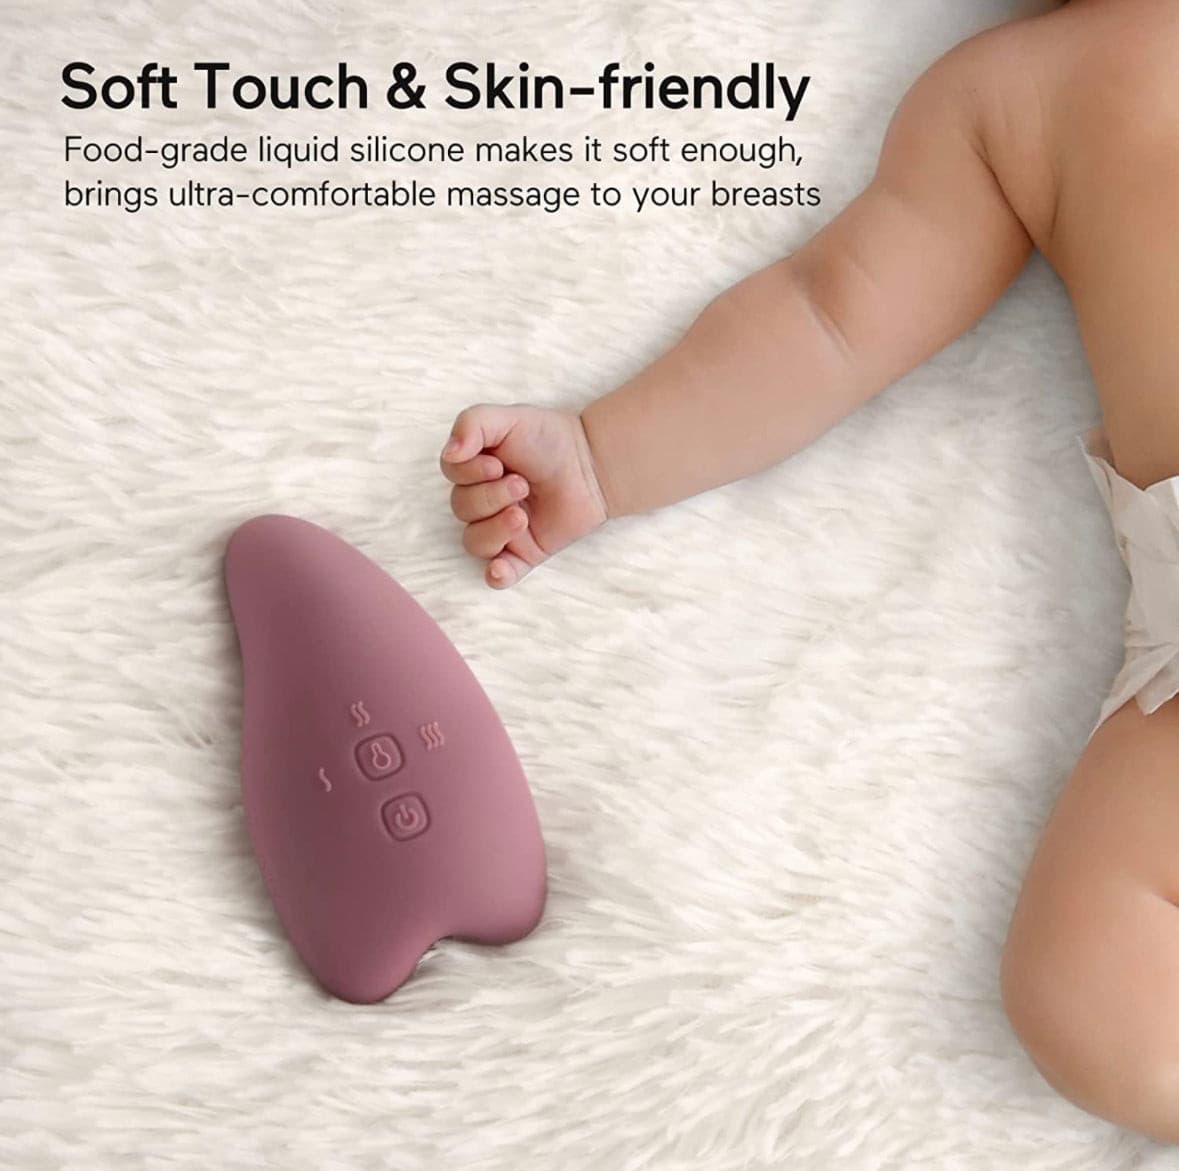 Momcozy Warming Lactation Massager 2-in-1, Soft Breast Massager for Breastfeeding, Heat + Vibration Adjustable for Clogged Ducts, Improve Milk Flow.